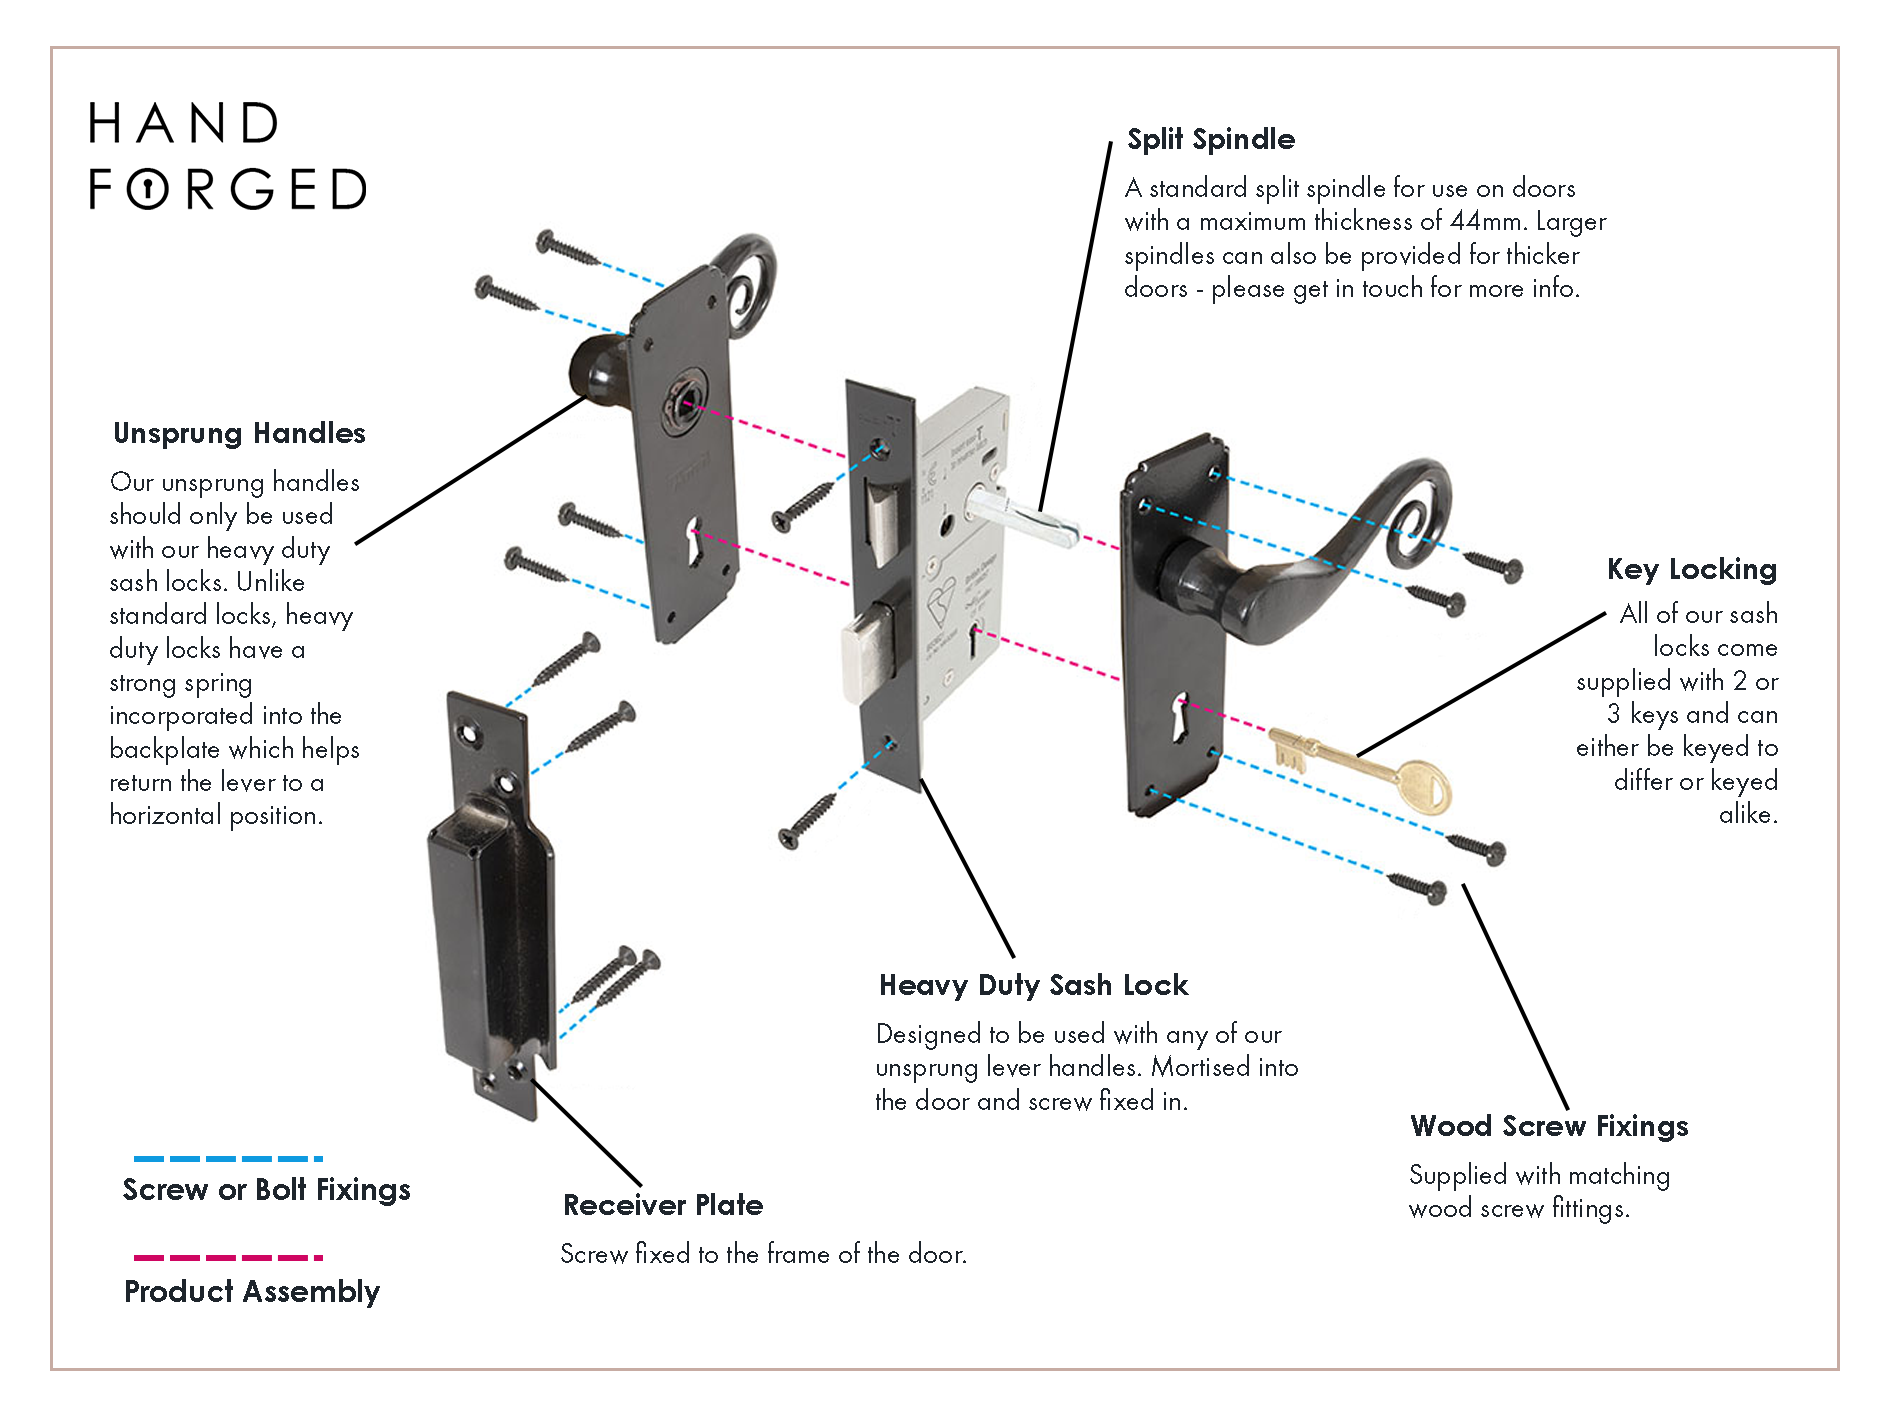 Exploded diagram of a Black heavy duty sash lock and a Black Monkeytail unsprung lever handle with arrows pointing to different parts of the product and text explaining what they're for.